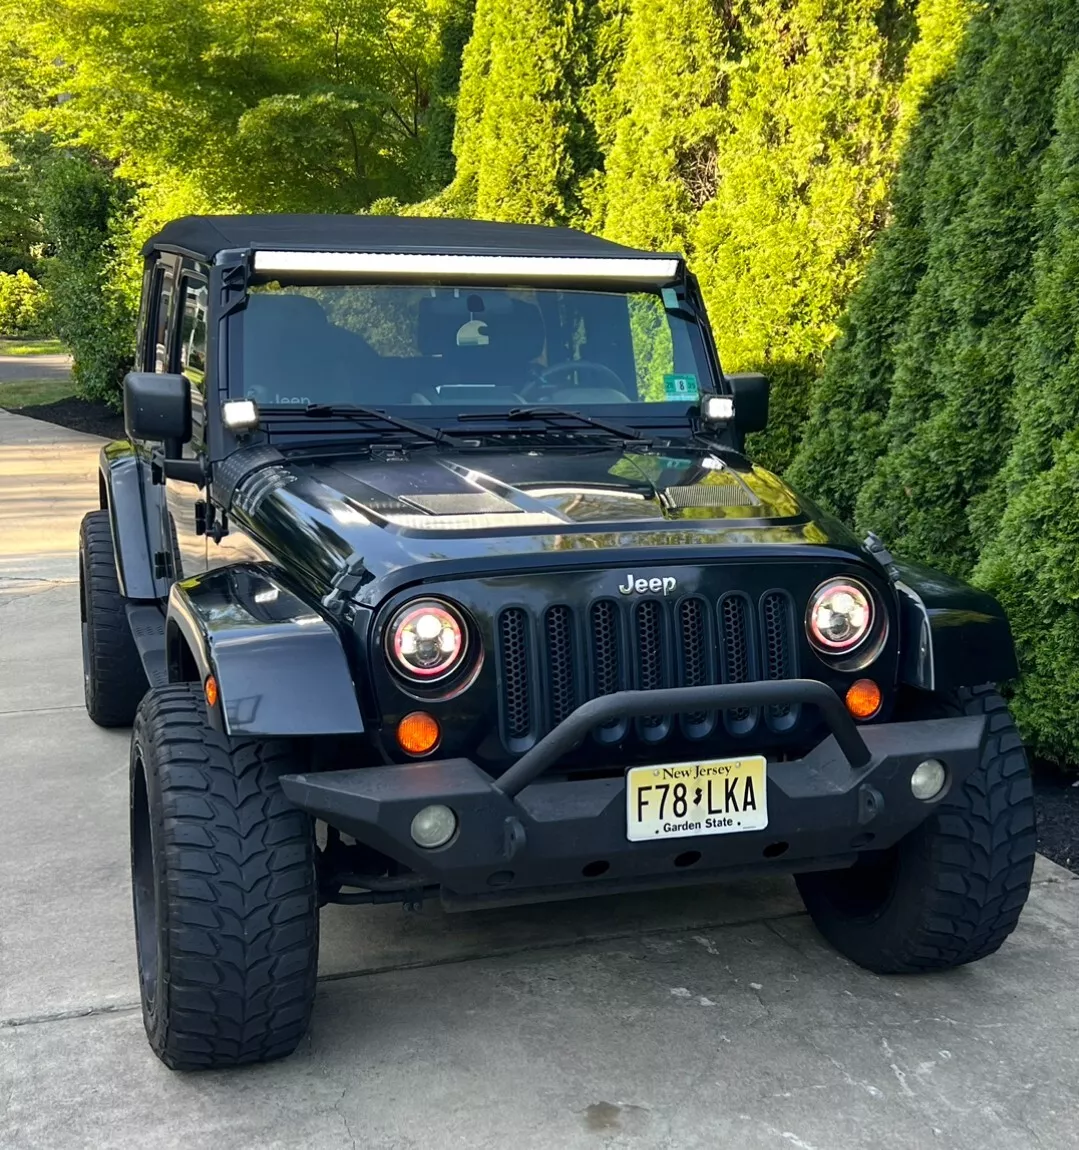 2007 Jeep Wrangler for sale